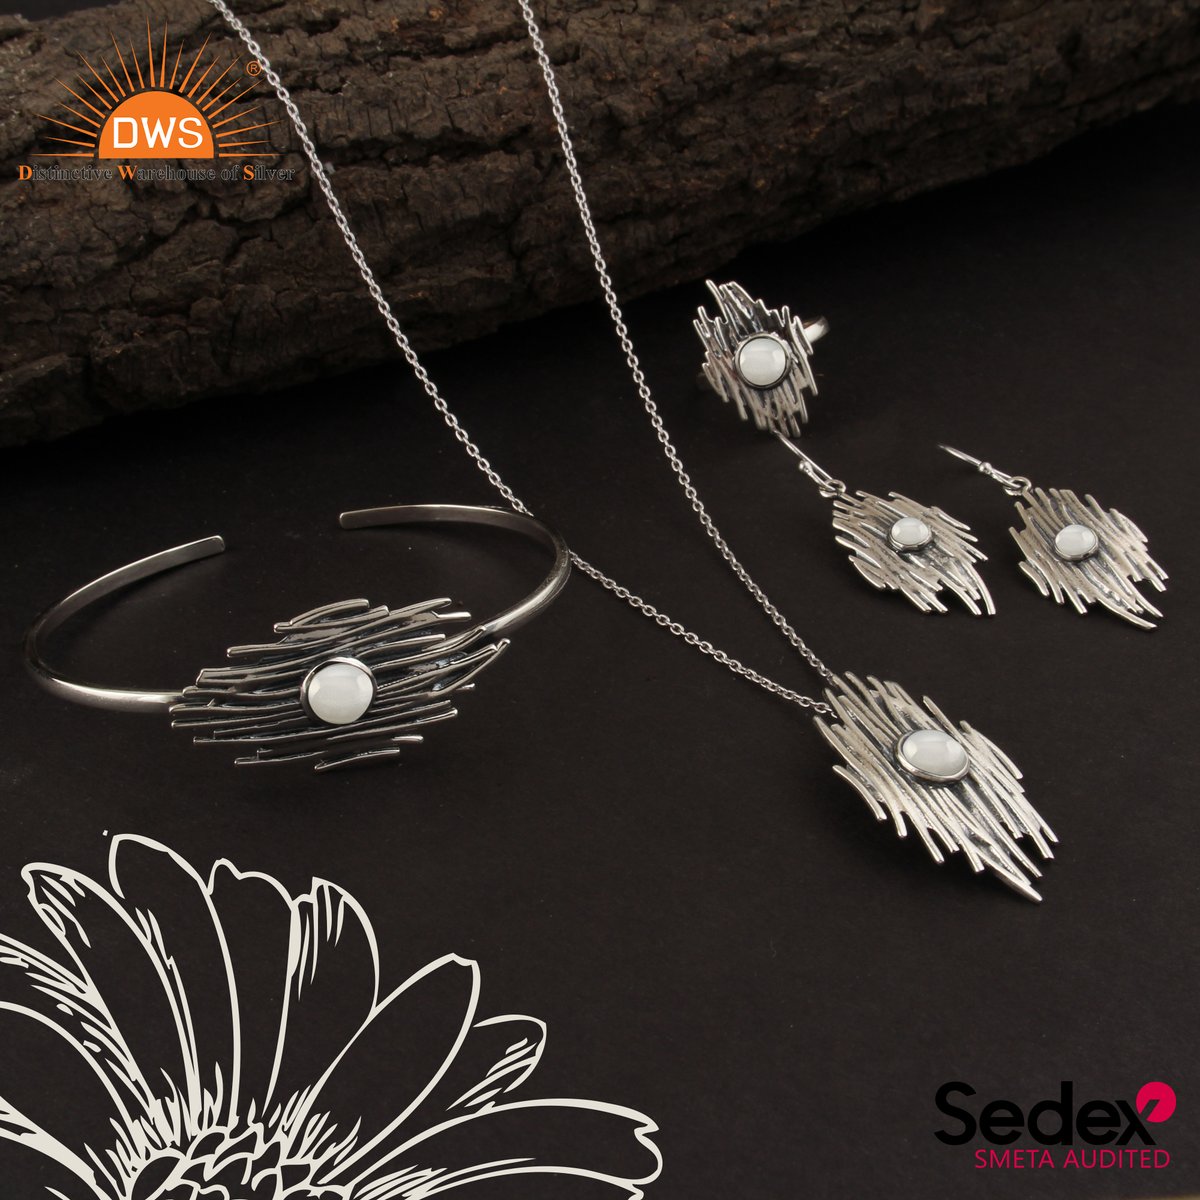 Visit Sedex SMETA Audited DWS Jewellery Store To Purchase White Moonstone Jewellery Set At Reasonable Cost In India.
Order Now: bit.ly/3ZmOCR0

#whitemoonstone #moonstone #moonstonejewelry #gemstonejewelry #gemstonejewellery #jewellerymaker #jewelrymaker